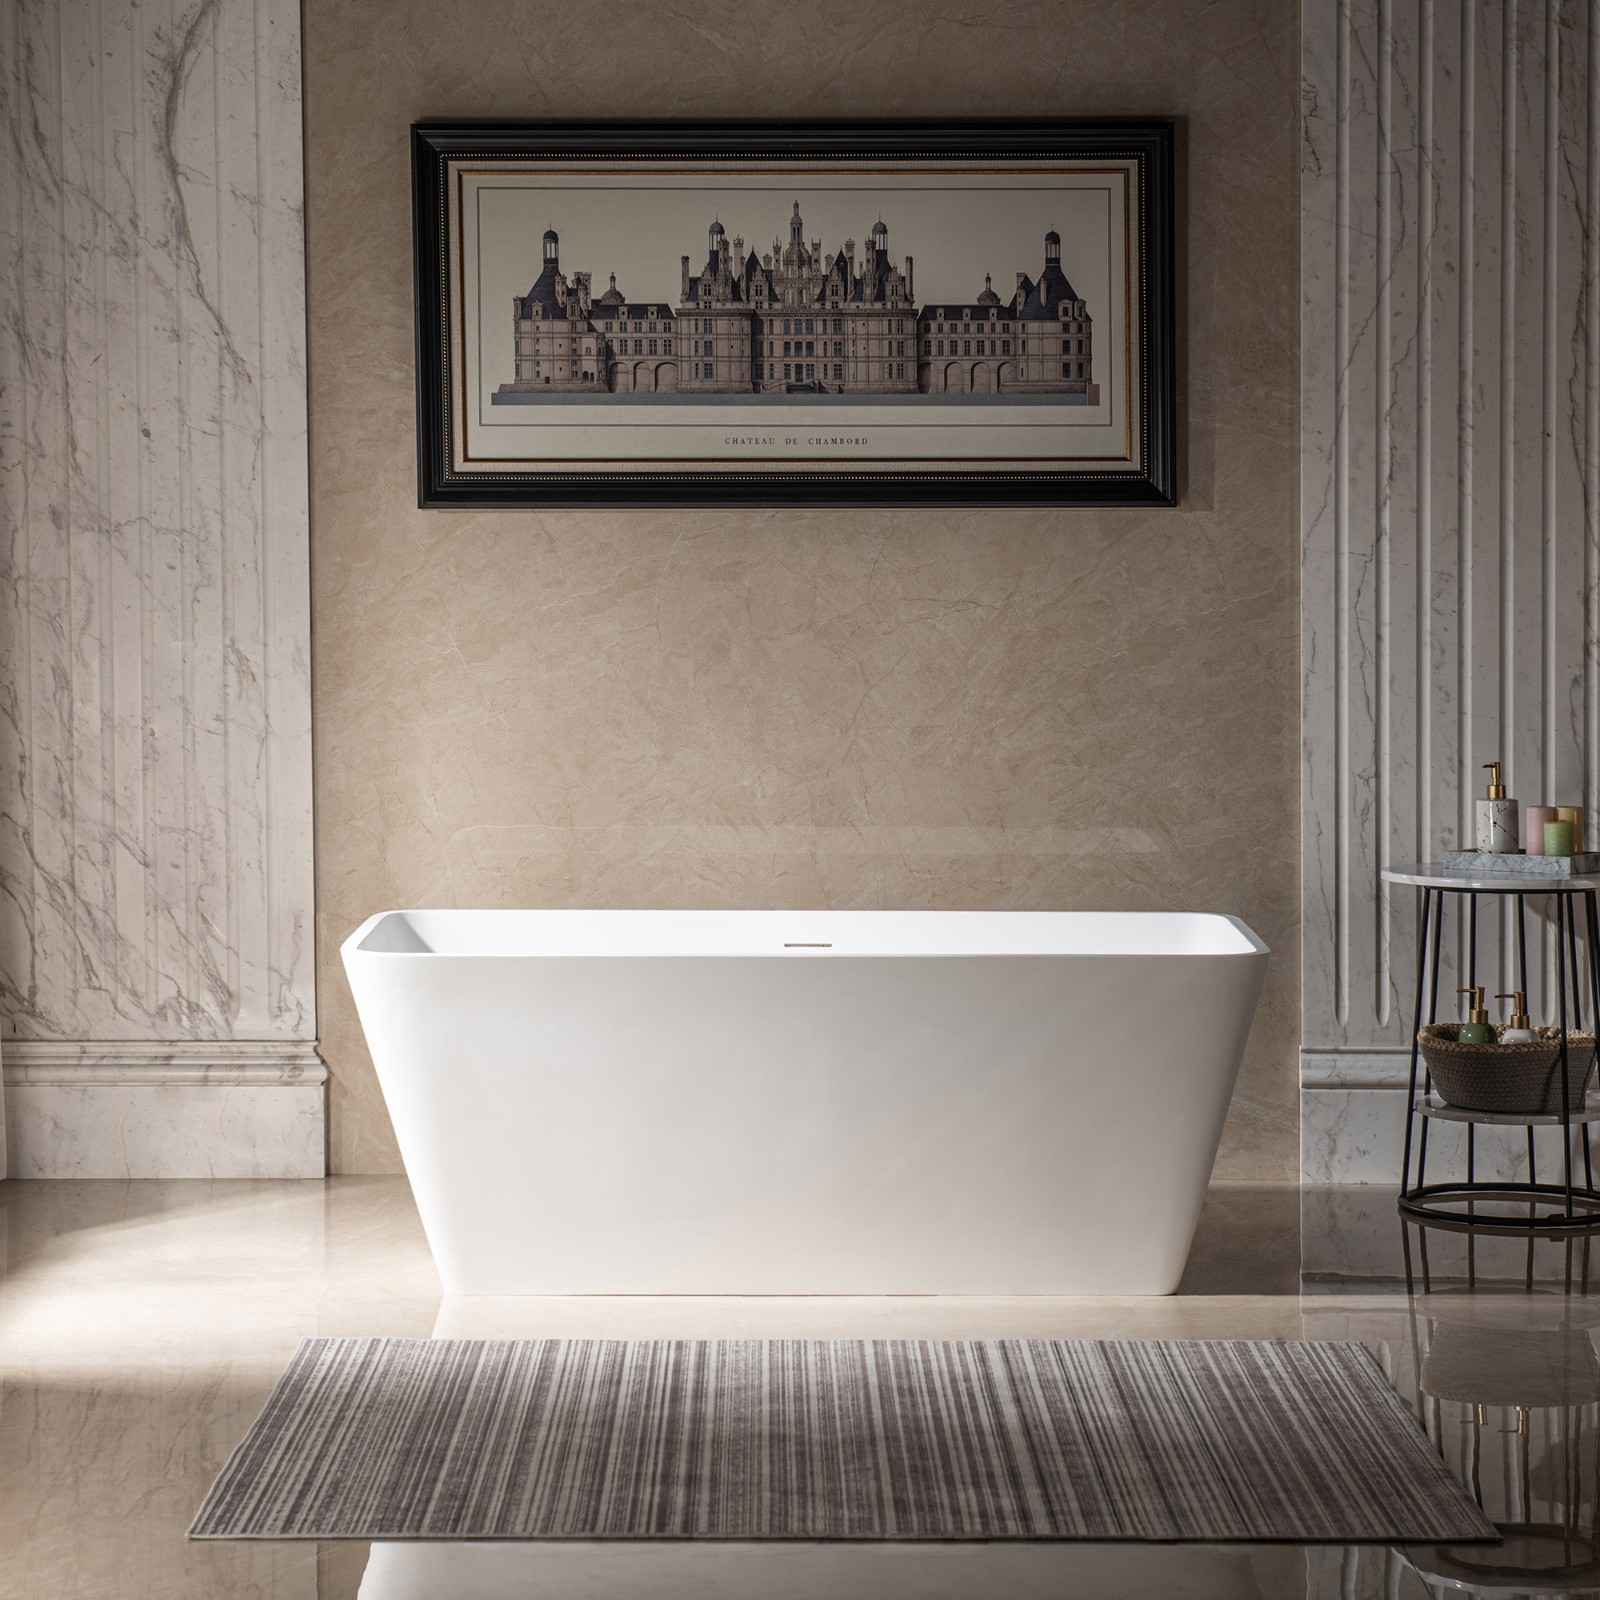  WOODBRIDGE 59 in. x 27.5 in. Luxury Contemporary Solid Surface Freestanding Bathtub in Matte White_4